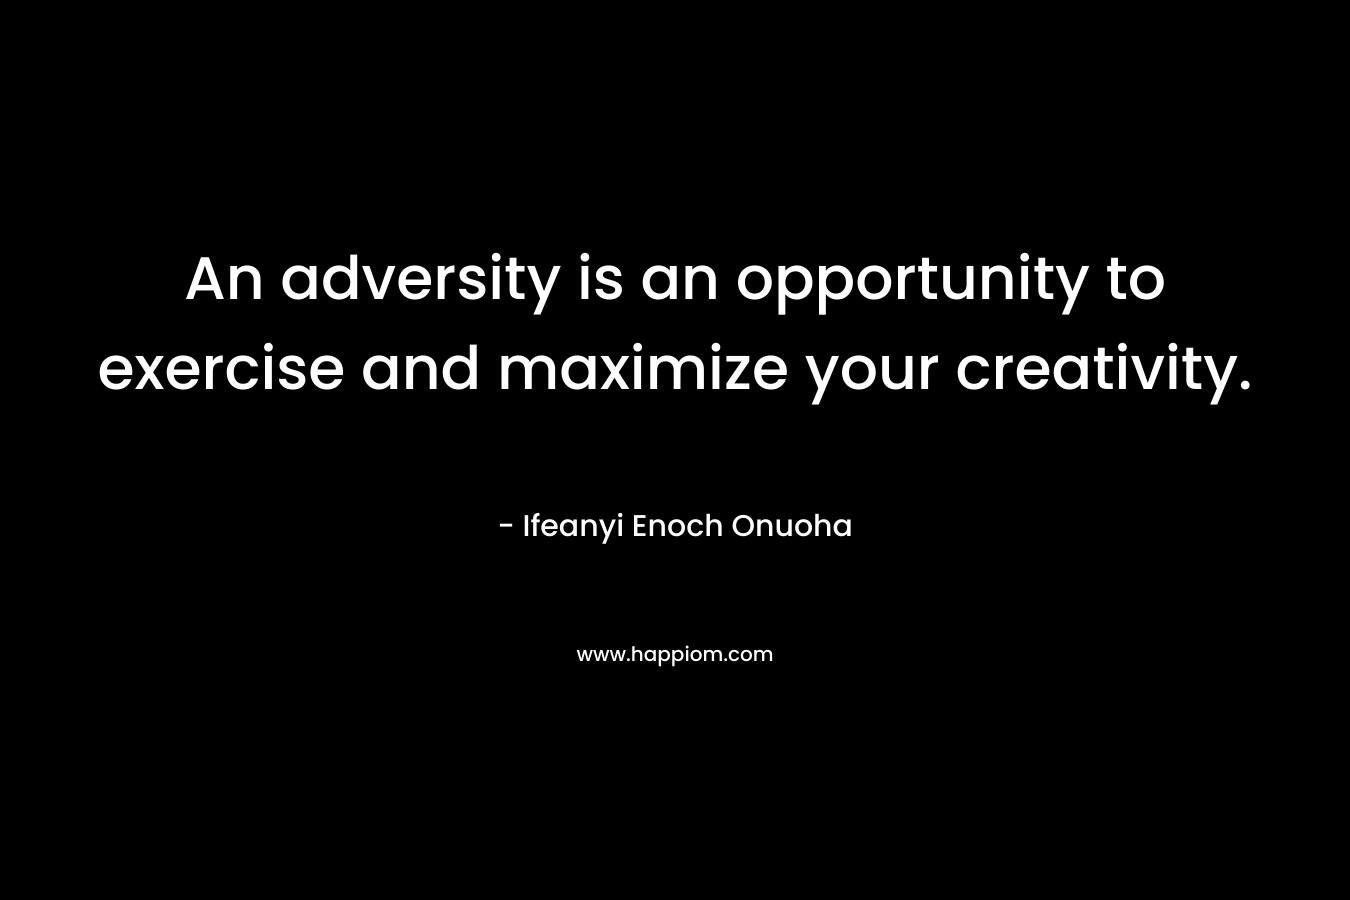 An adversity is an opportunity to exercise and maximize your creativity.